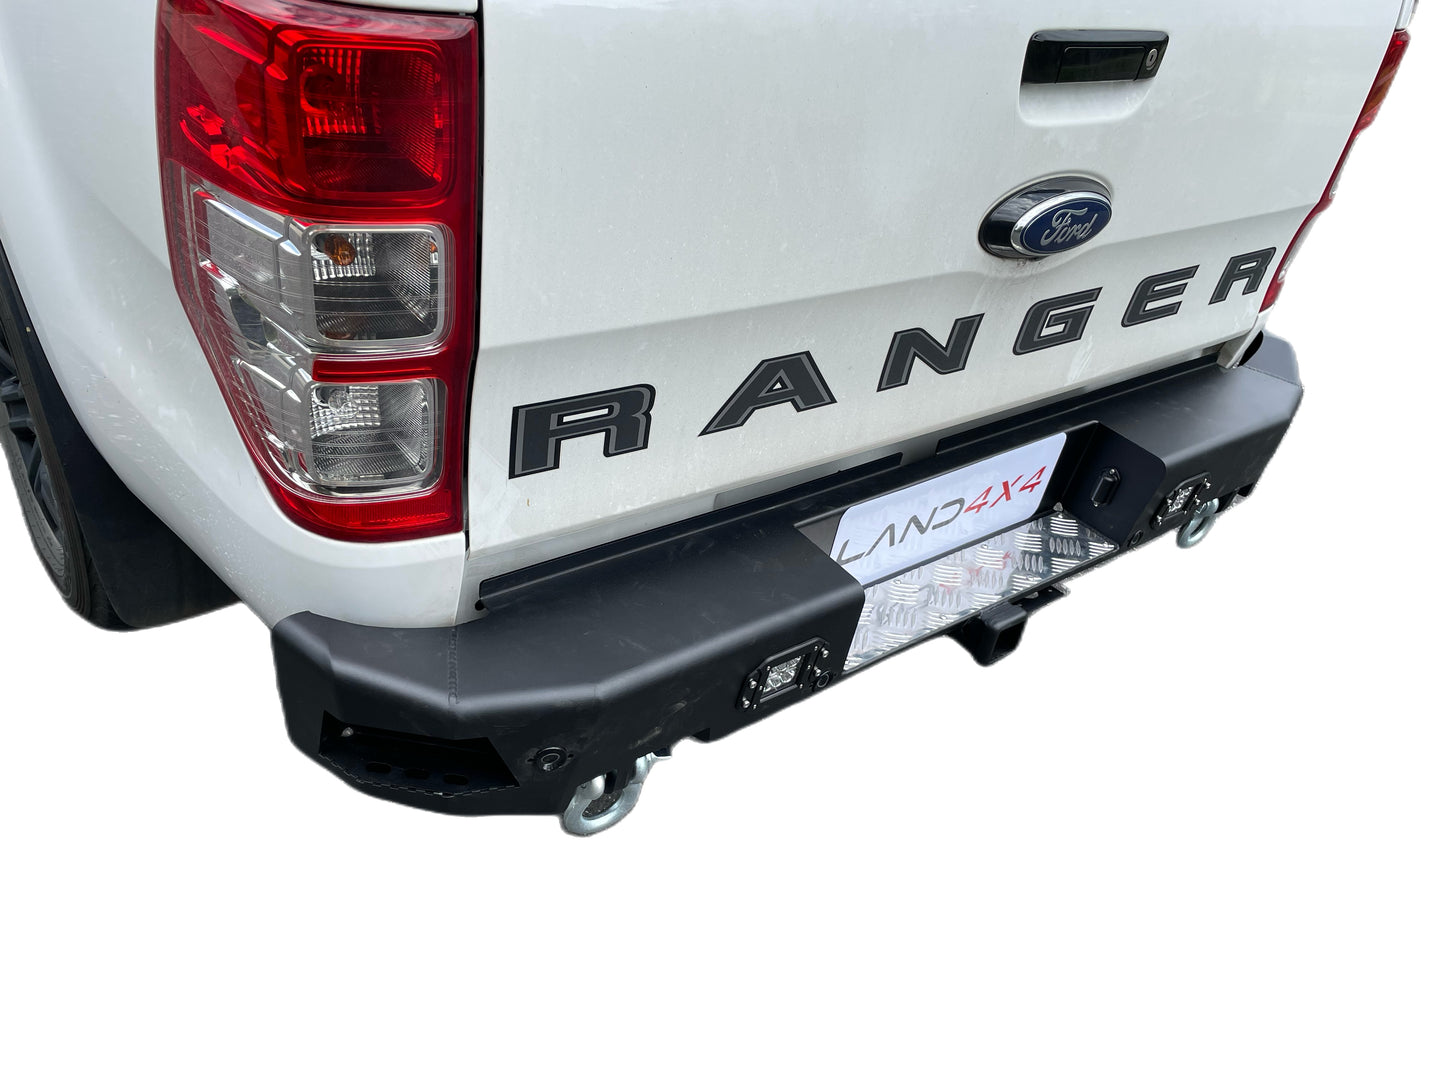 2011-2021 Ford Ranger T6/T7 PX1/PX2/PX3 rear tow bar (On sale)